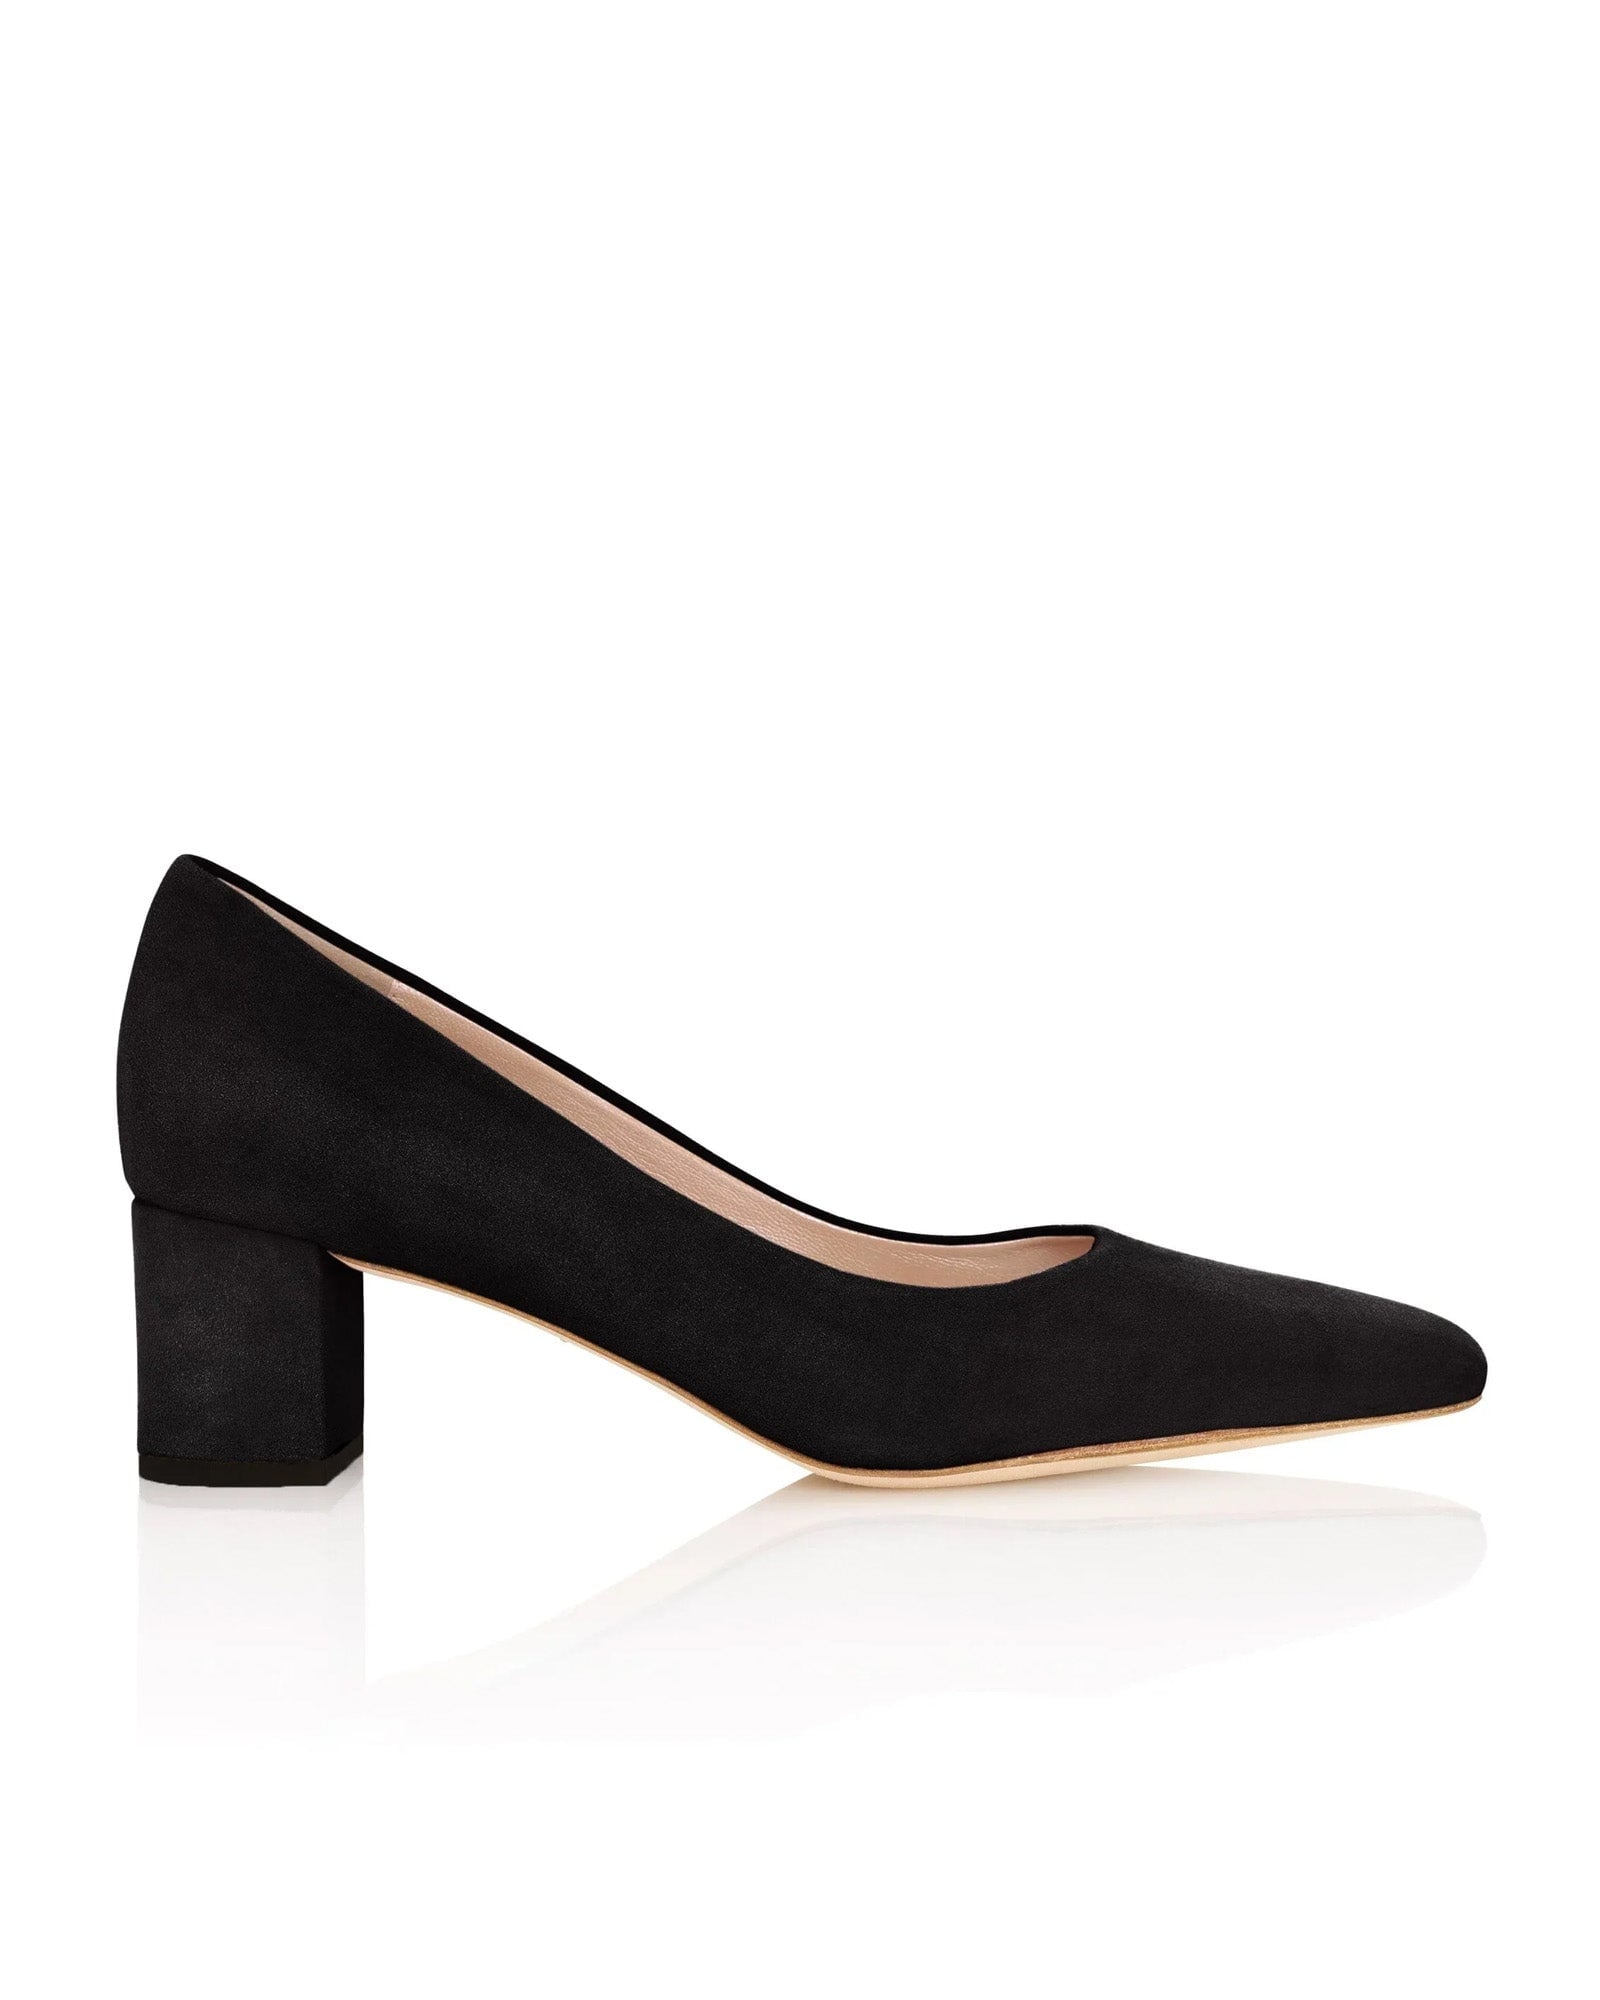 Block Heel Court Shoes (PIC26004) by Piccadilly for Pavers